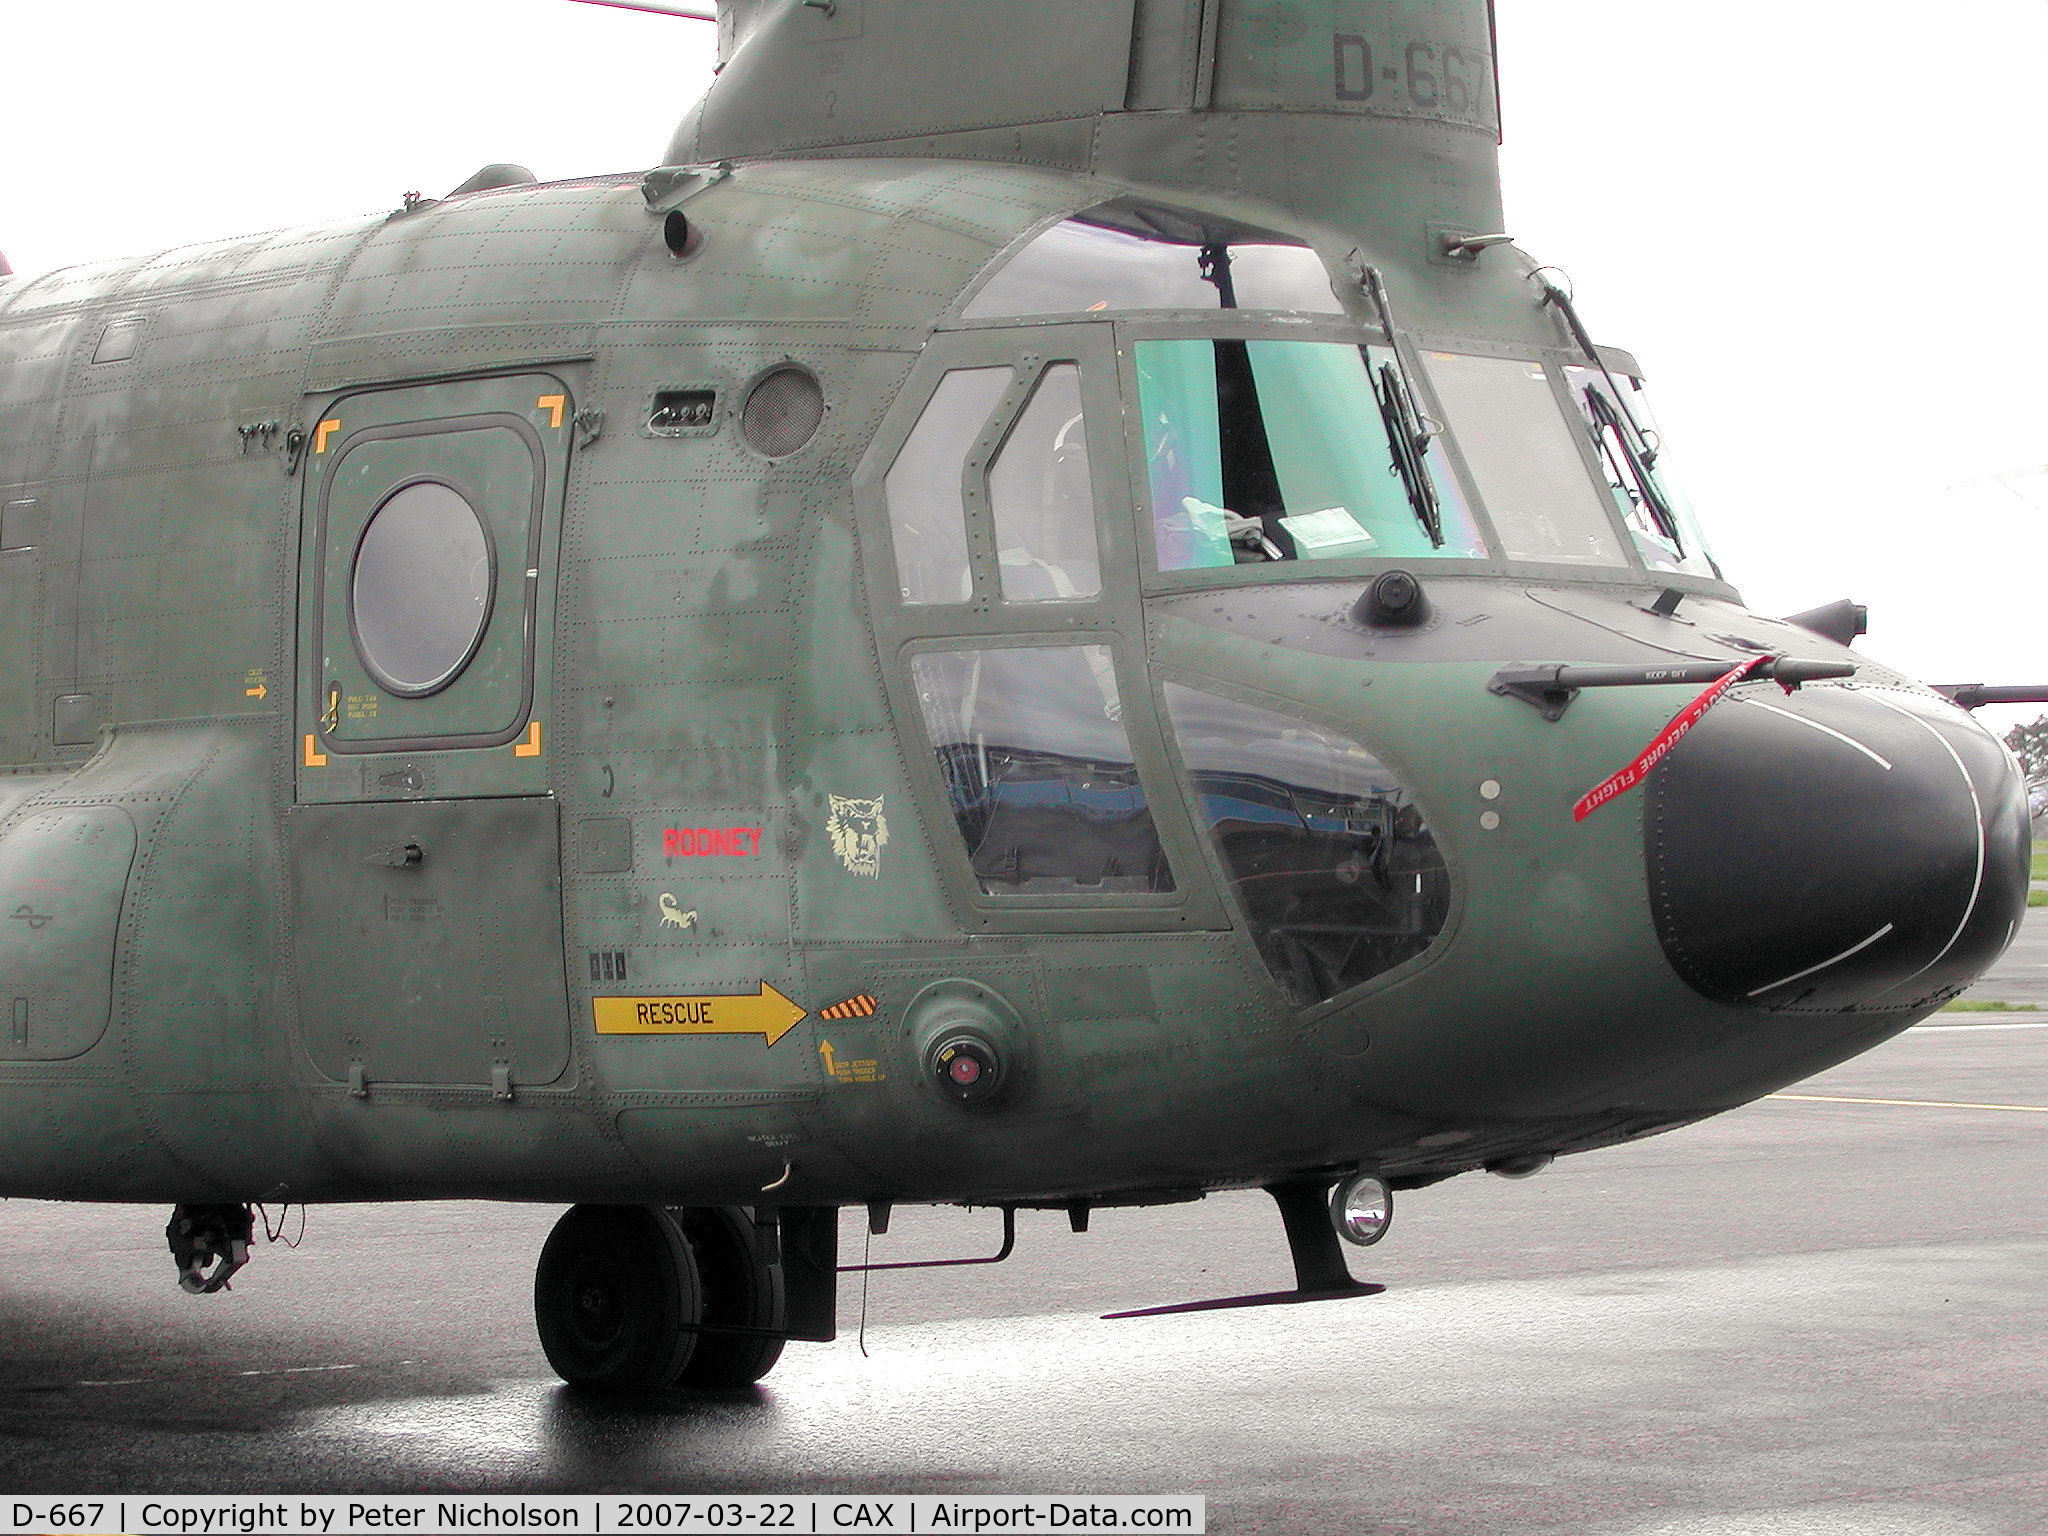 D-667, Boeing CH-47D Chinook C/N M.3667/NL-007, This Royal Netherlands Air Force CH-47D Chinook, callsign Omega, of 298 Squadron was seen at Carlisle in the Spring of 2007.